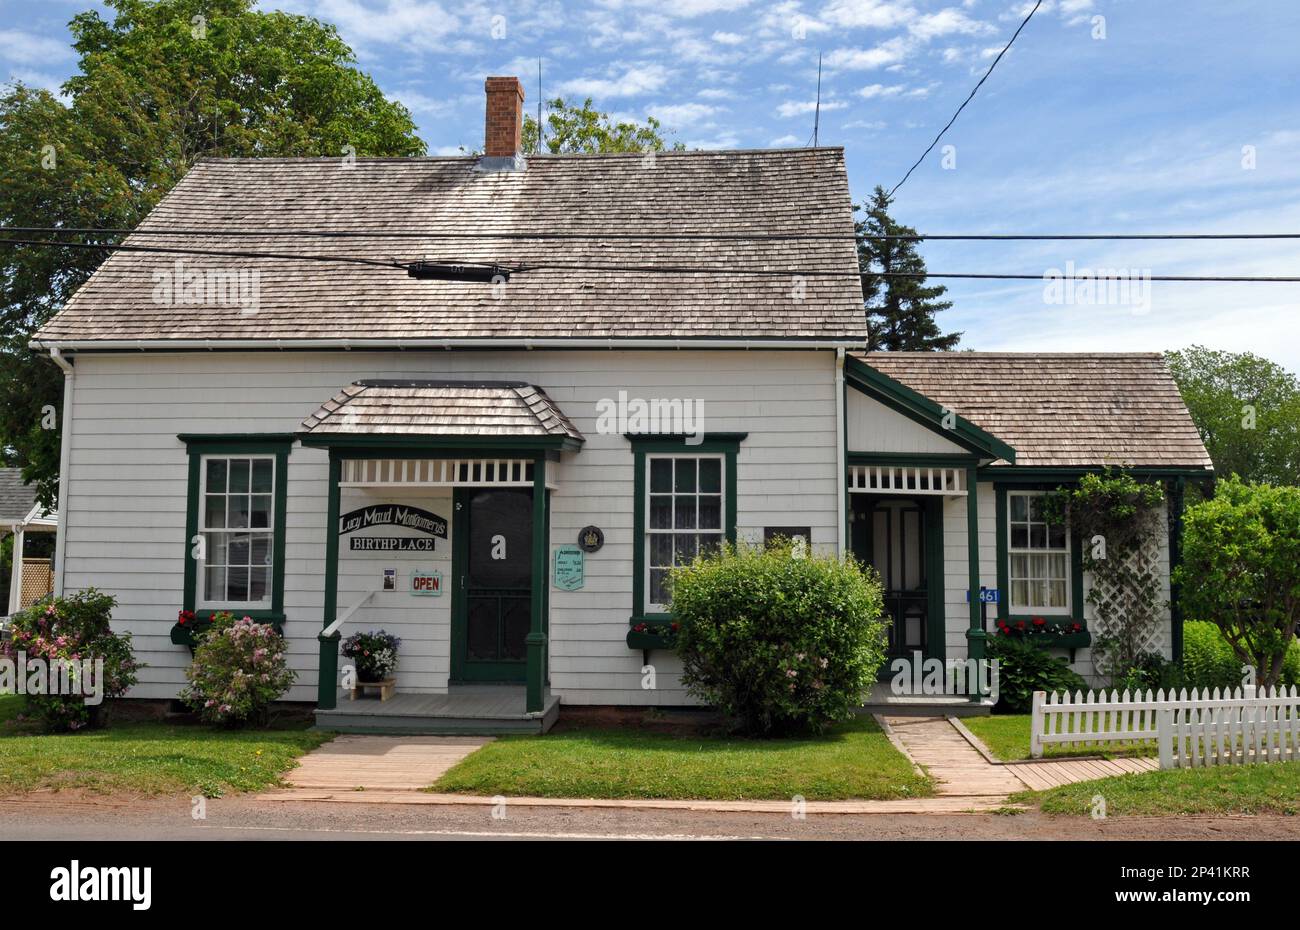 Lucy Maud Montgomery, author of Anne of Green Gables, was born in this house in New London, PEI, in 1874. It's now open to the public as a museum. Stock Photo